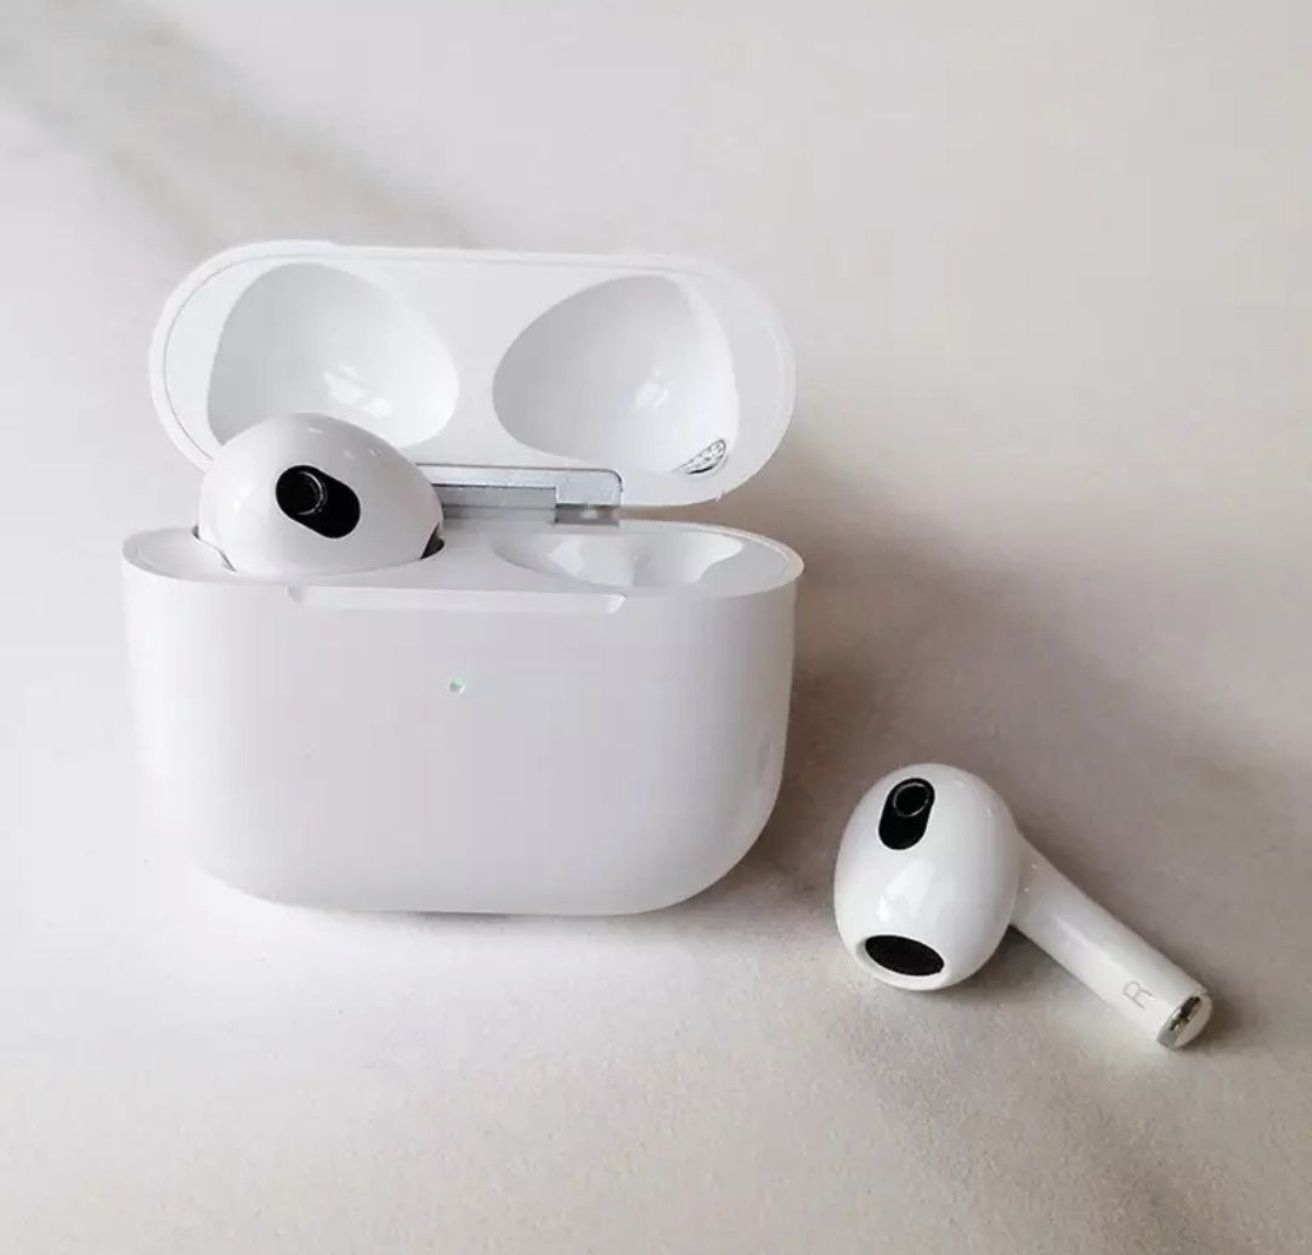 Casti wireless tip Airpods gen 3   android și ios 16-17 updated